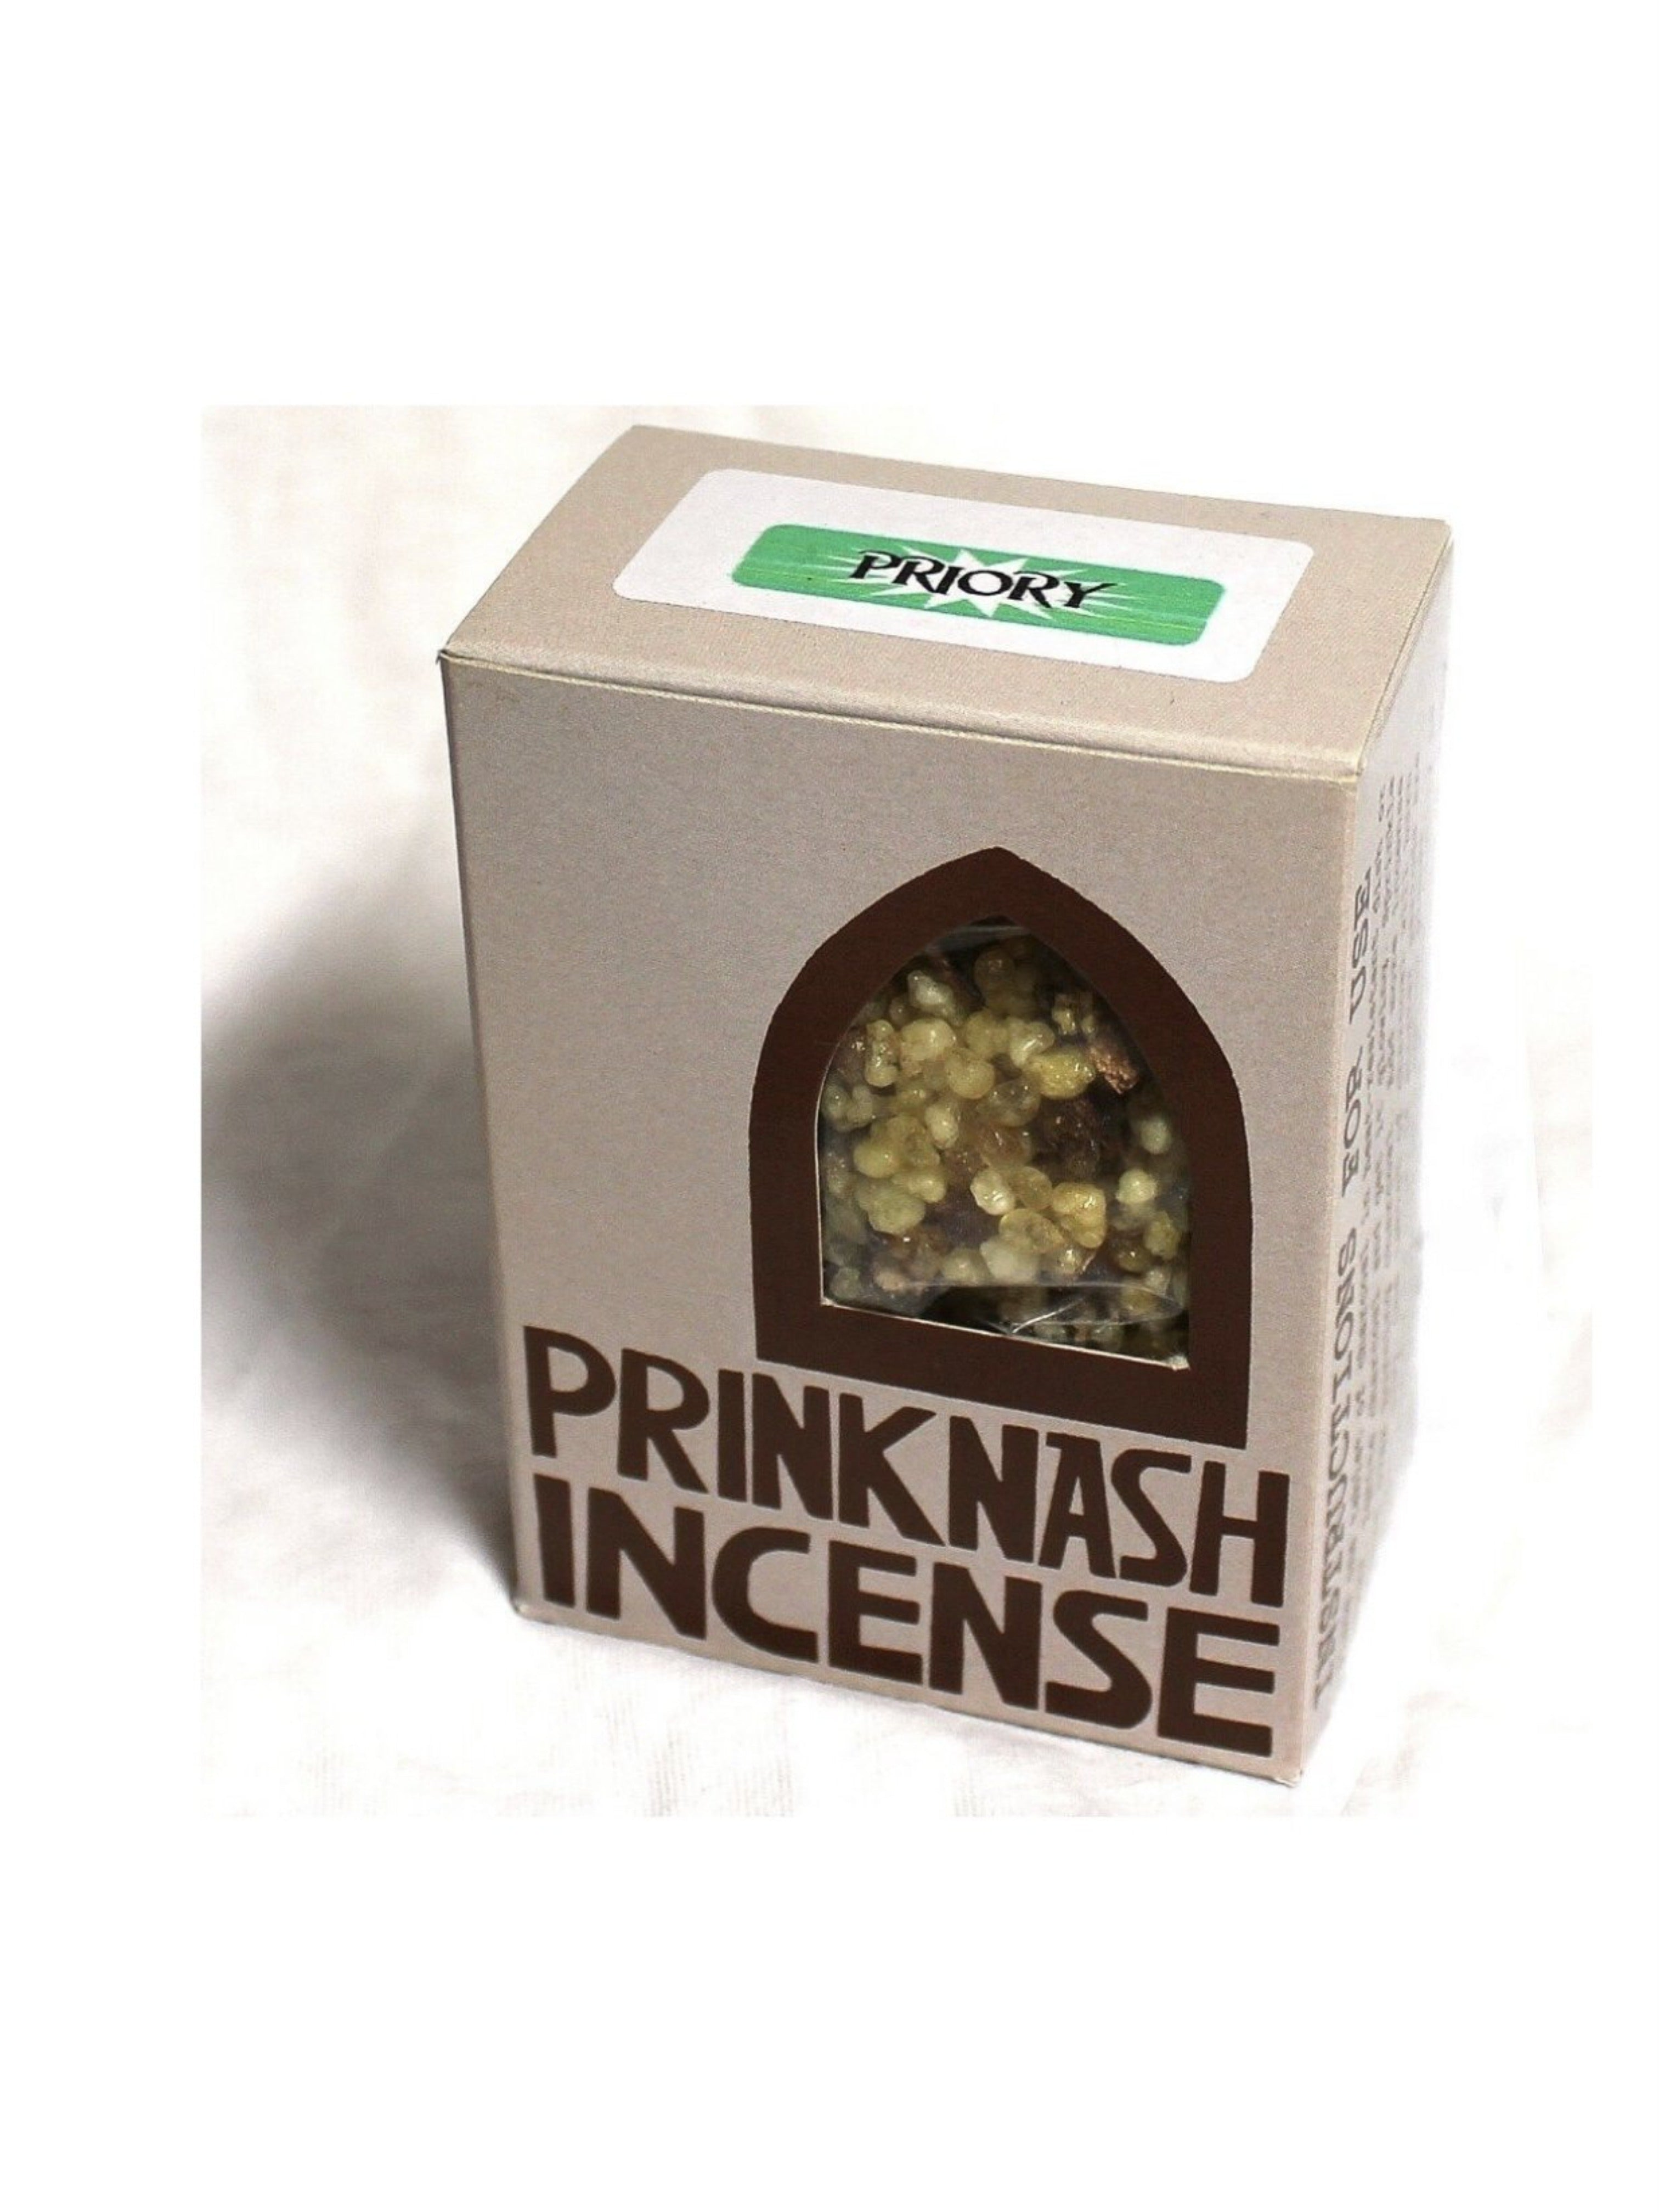 Prinknash Incense with Charcoal - Priory